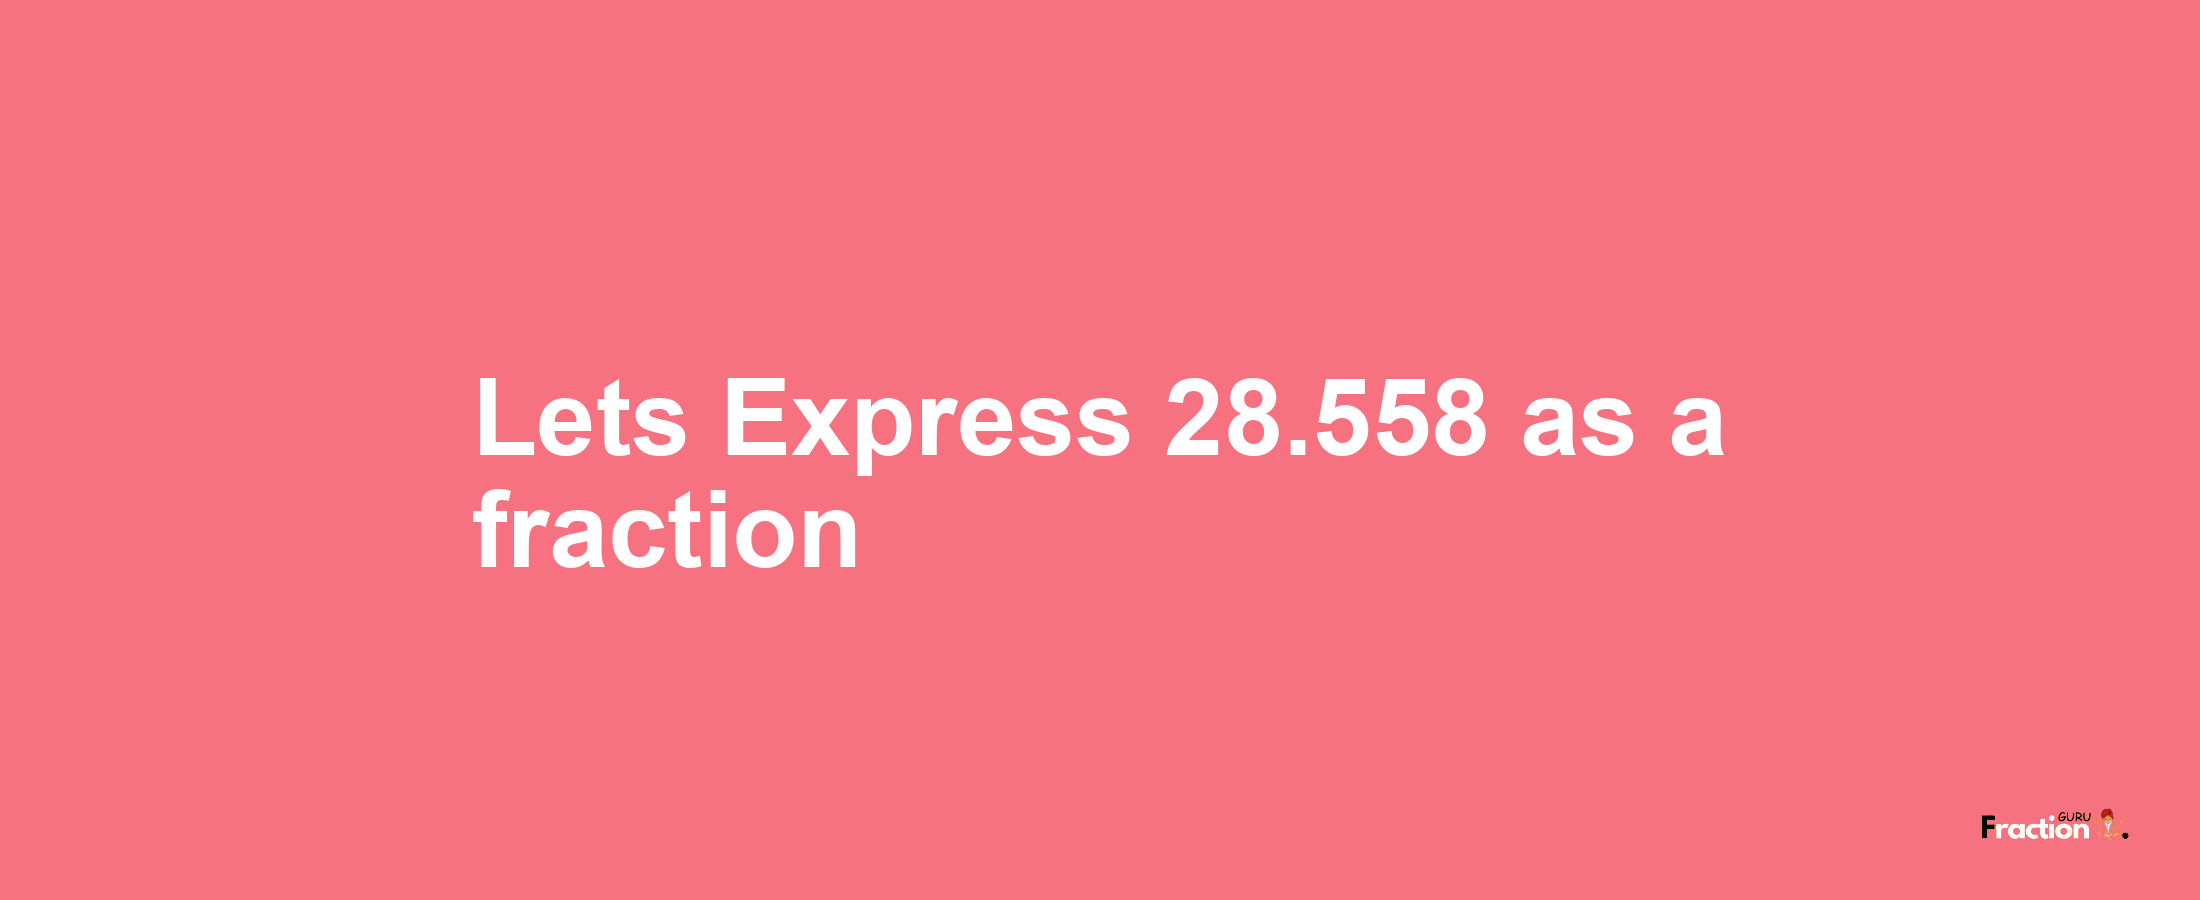 Lets Express 28.558 as afraction